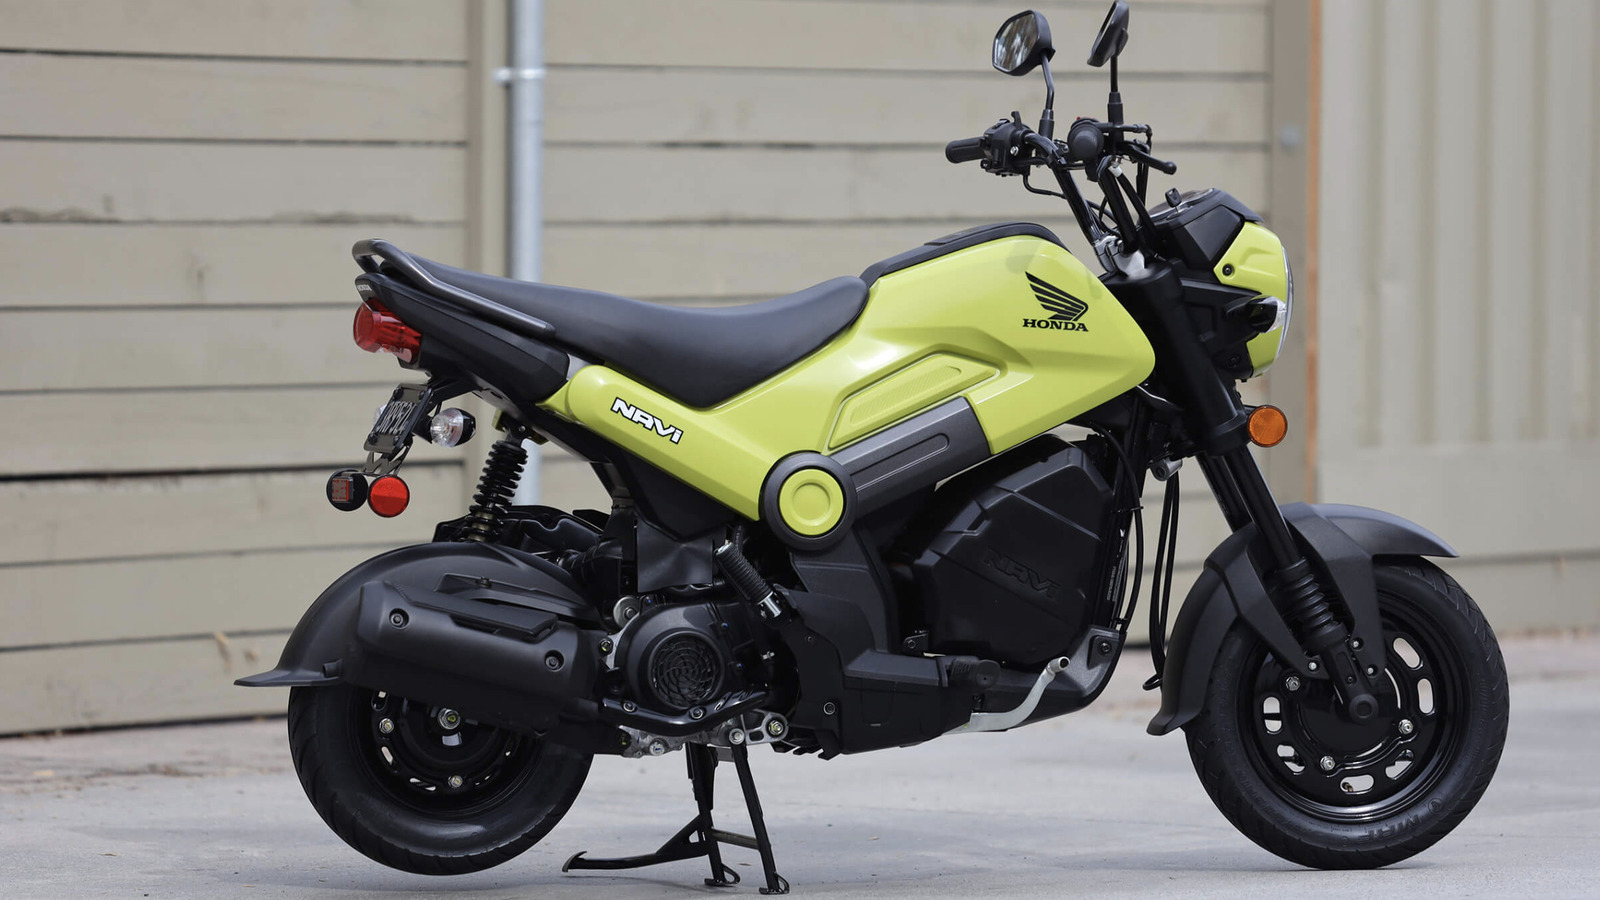 Is The Honda Navi A Motorcycle Or Scooter? What To Know About This Pocket Bike – SlashGear